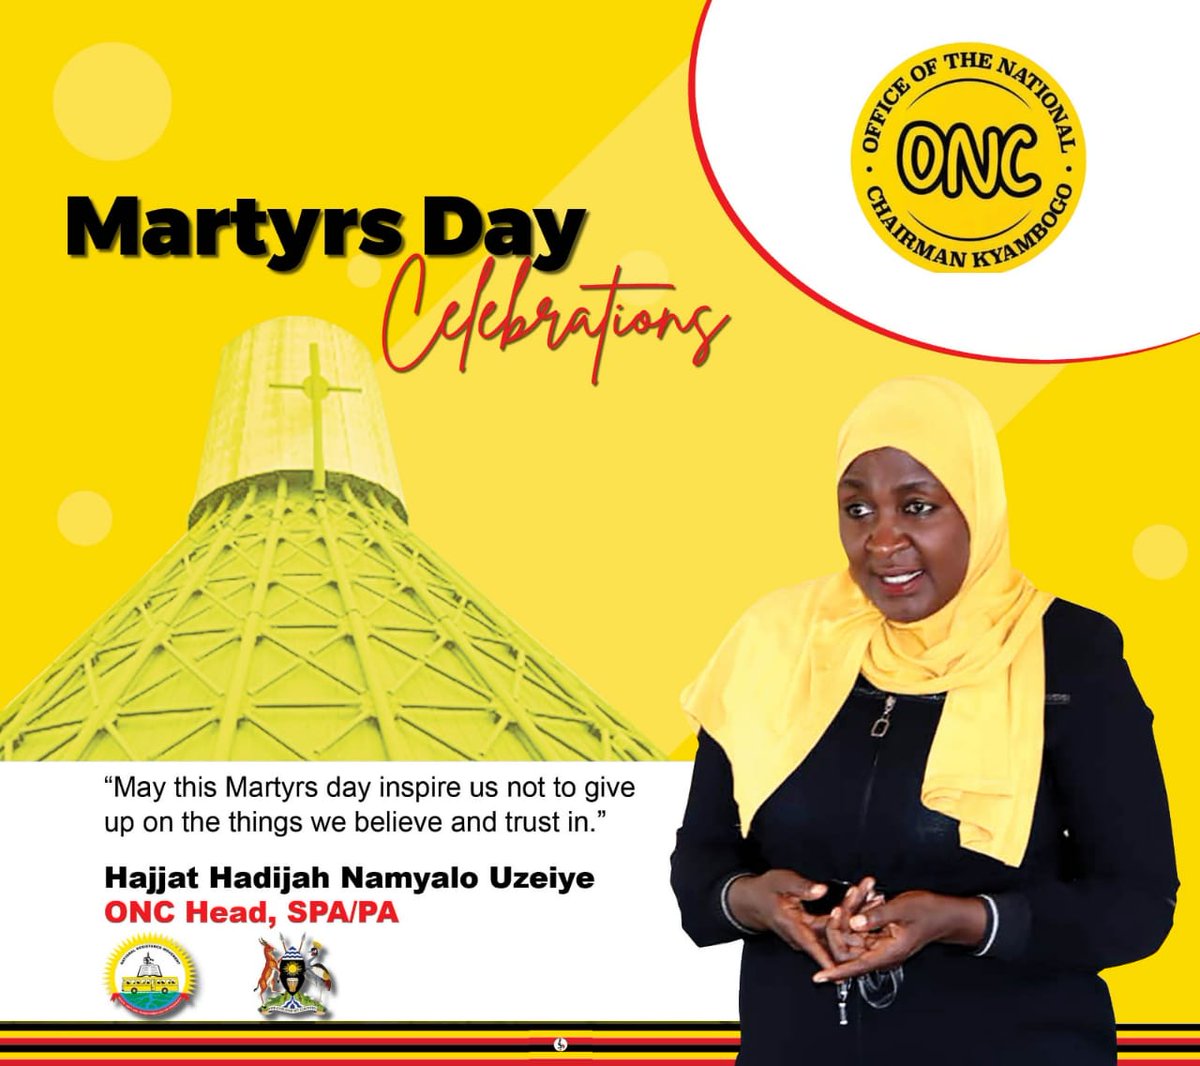 The head of the @onc_nrm, Hajjat Uzeiye Hadijah today joins Ugandans to honor and celebrate Ugandan martyrs, who paid the ultimate price and sacrificed their lives for their faith.

Their devotion, courage and faith serve as an inspiration for all.
Happy #MartyrsDay2023